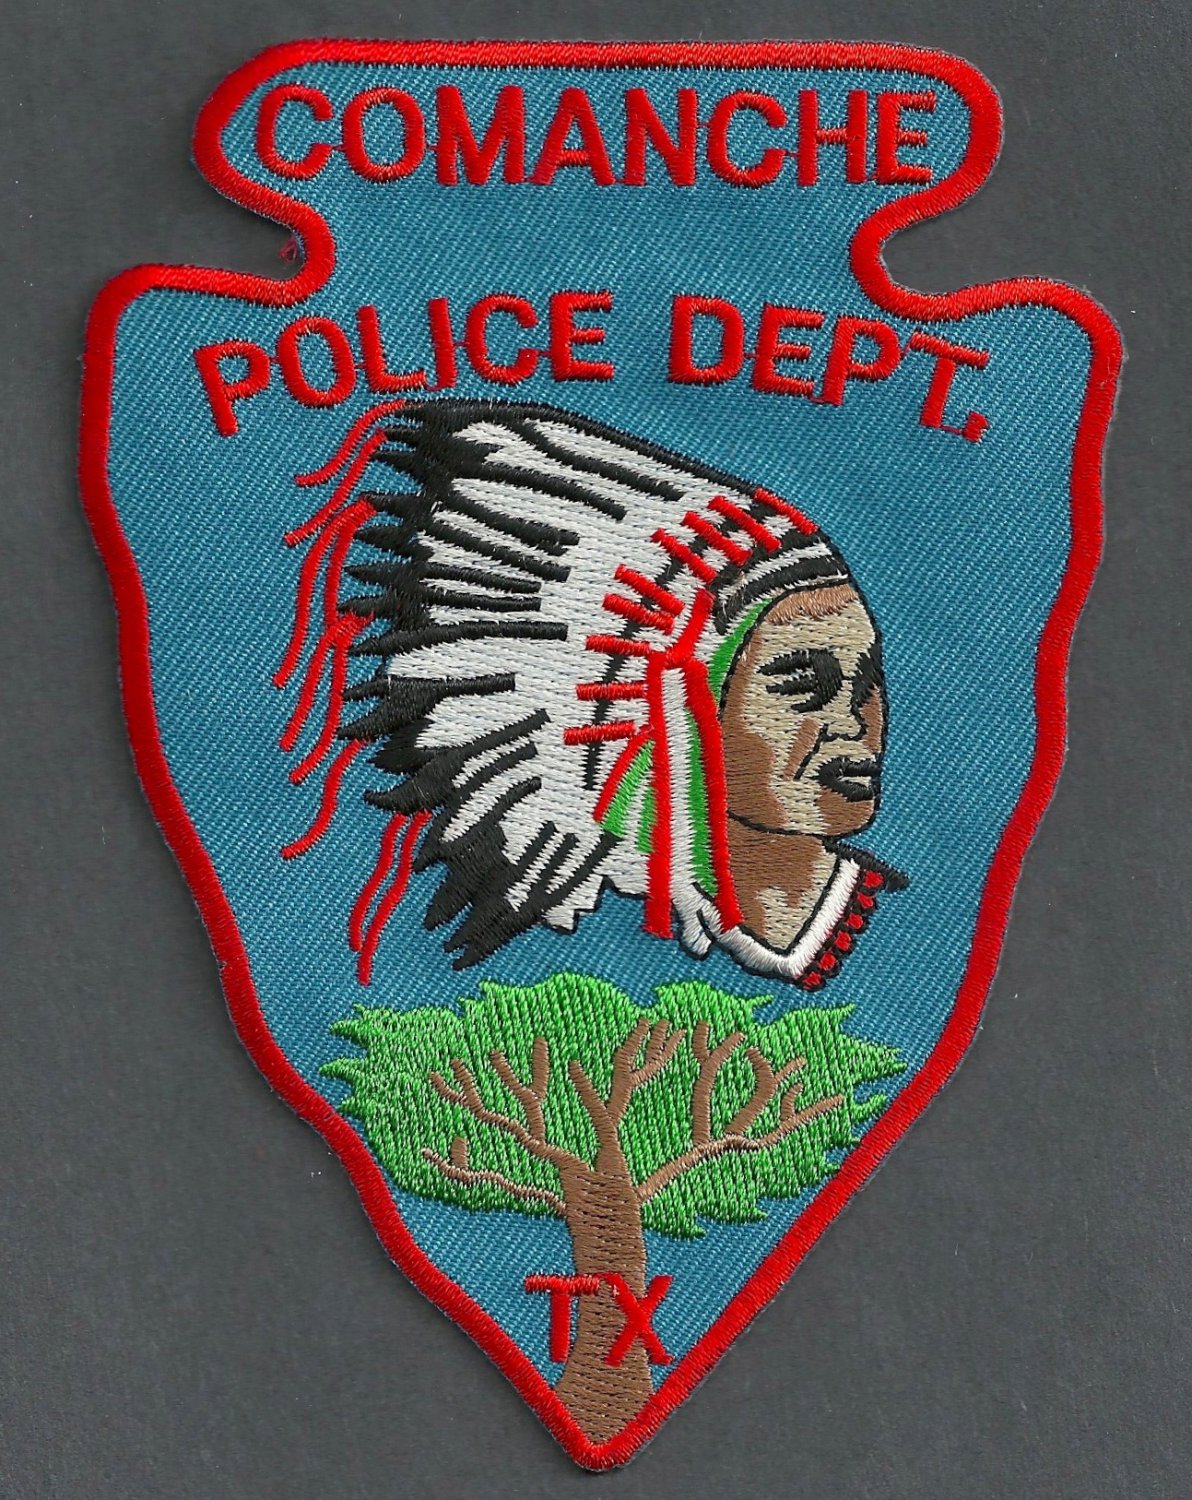 Comanche Police Patch from Texas in mint condition. 